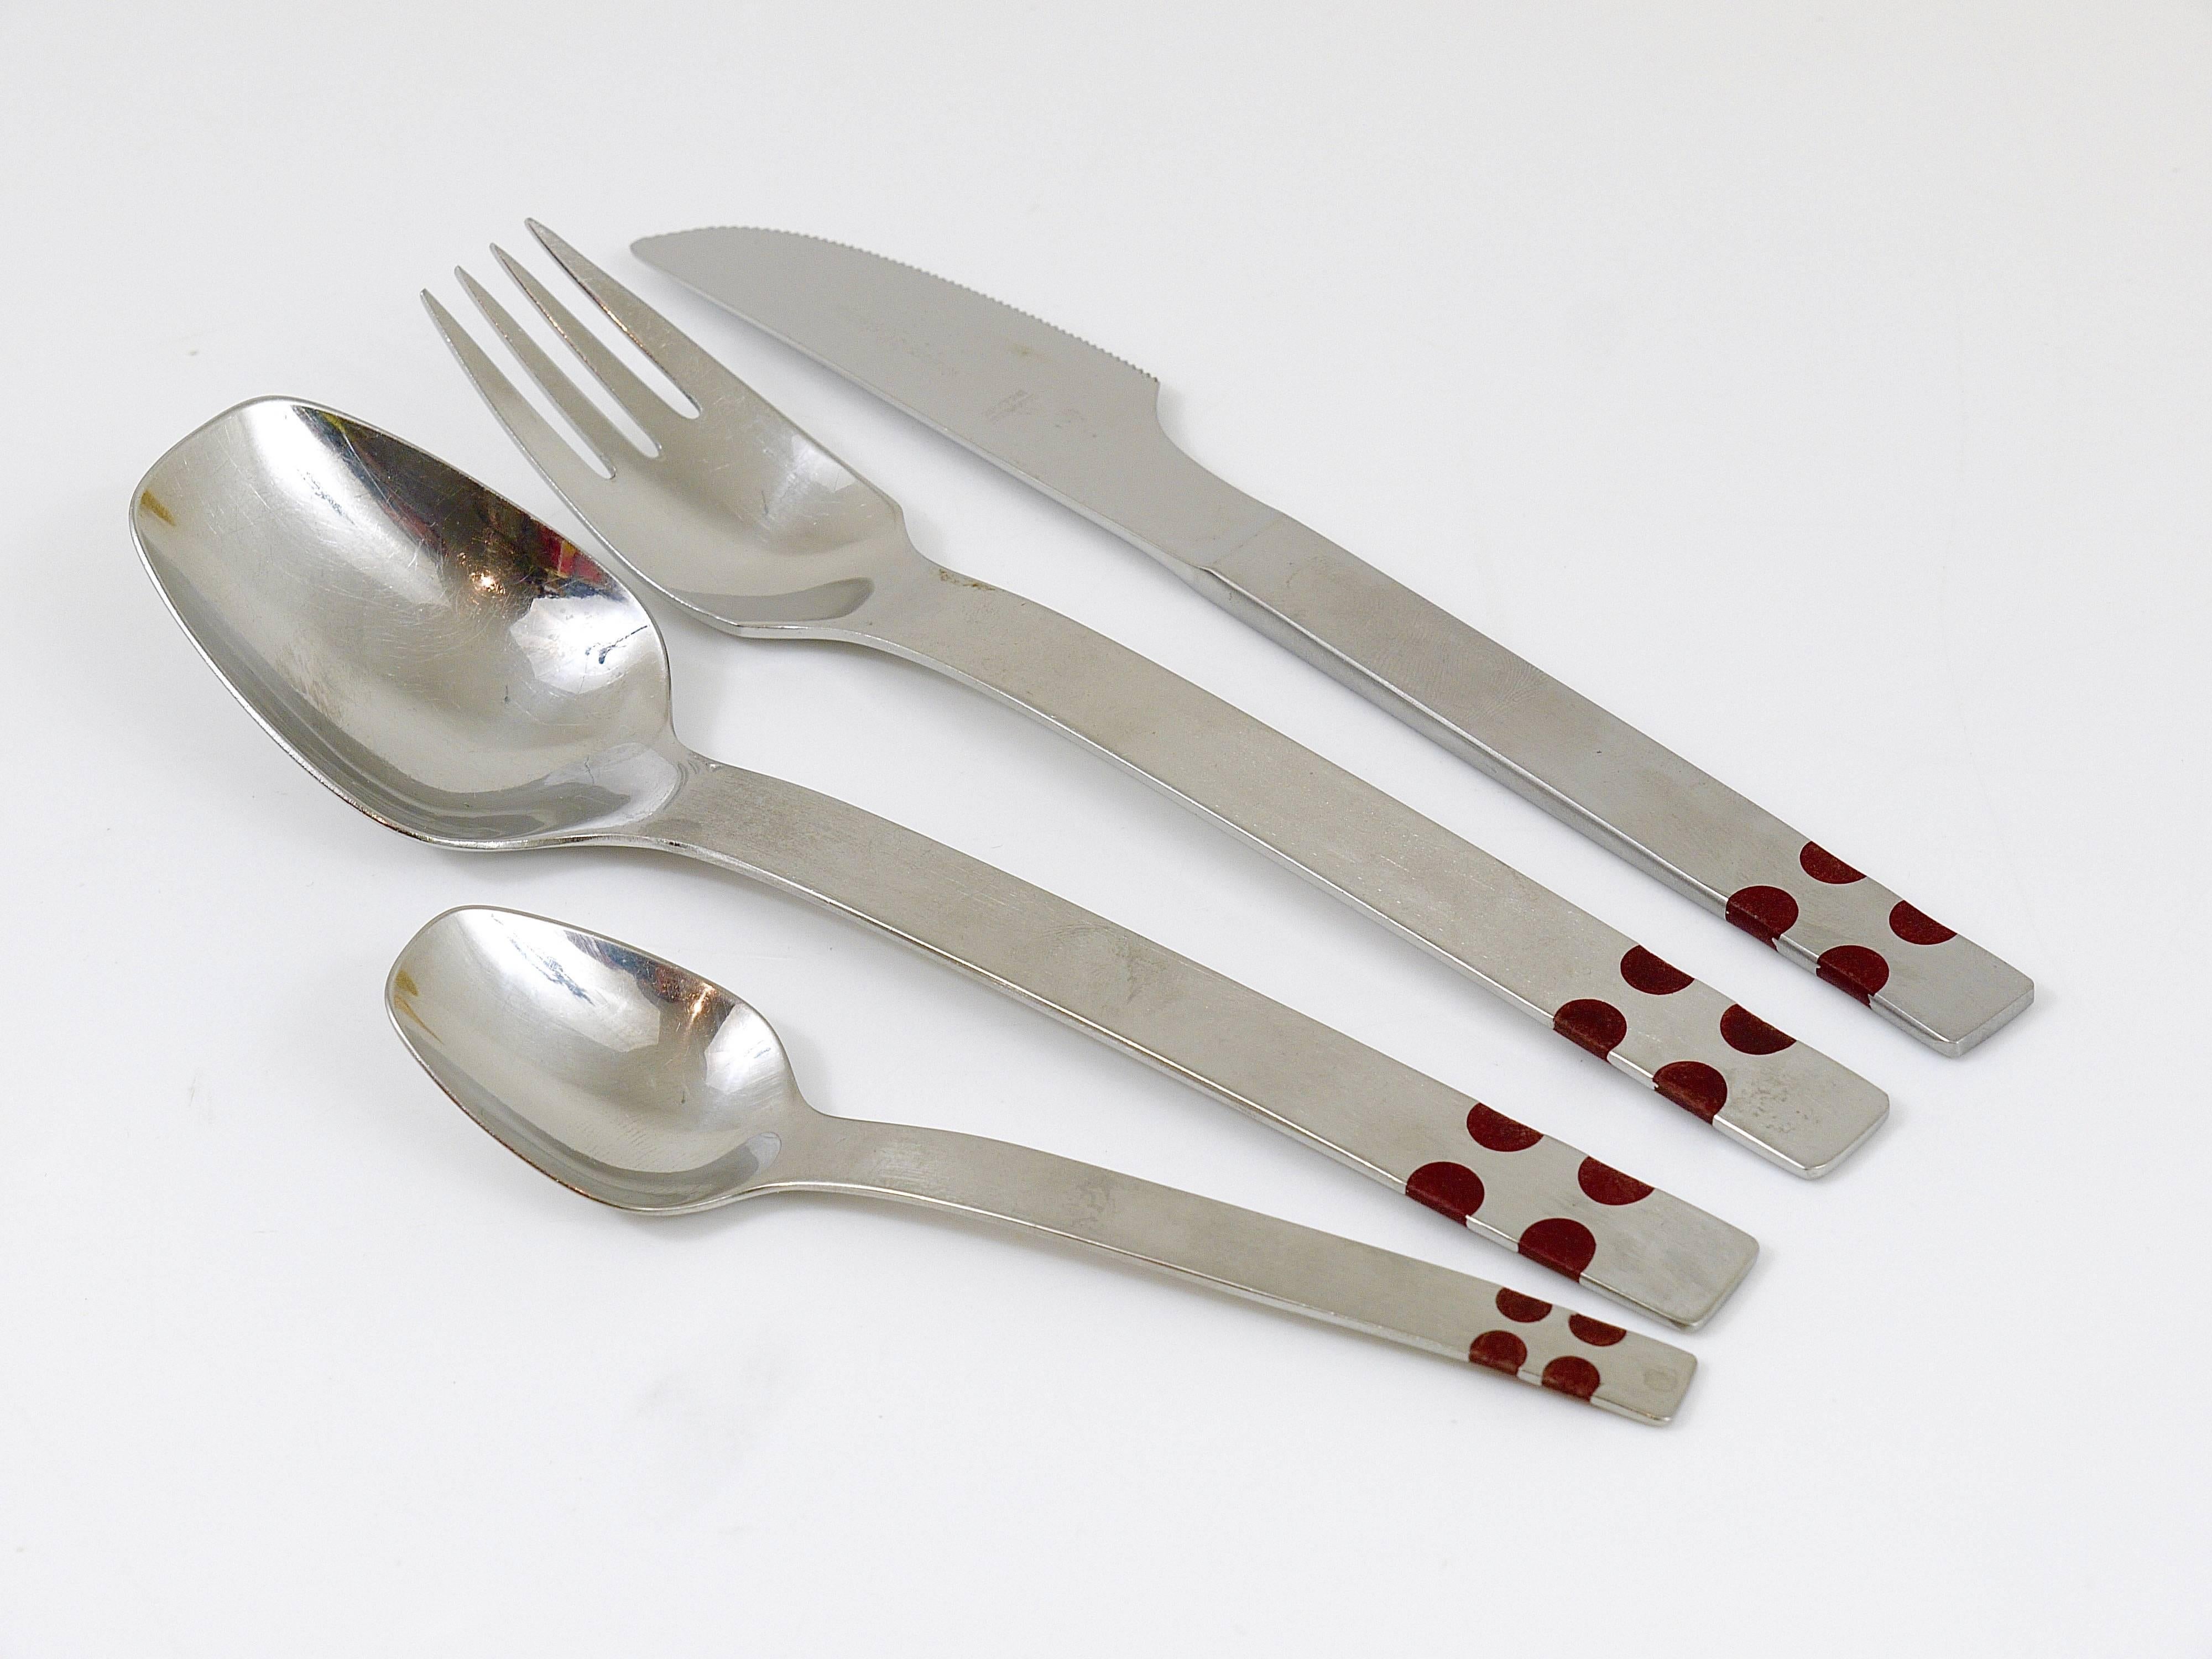 Beautiful modernist flatware cutlery originating from Austria, Model 2200. Design by Helmut Alder and manufactured by Amboss Austria during the 1960s. This high-quality flatware set is forged from durable stainless steel, ensuring longevity and